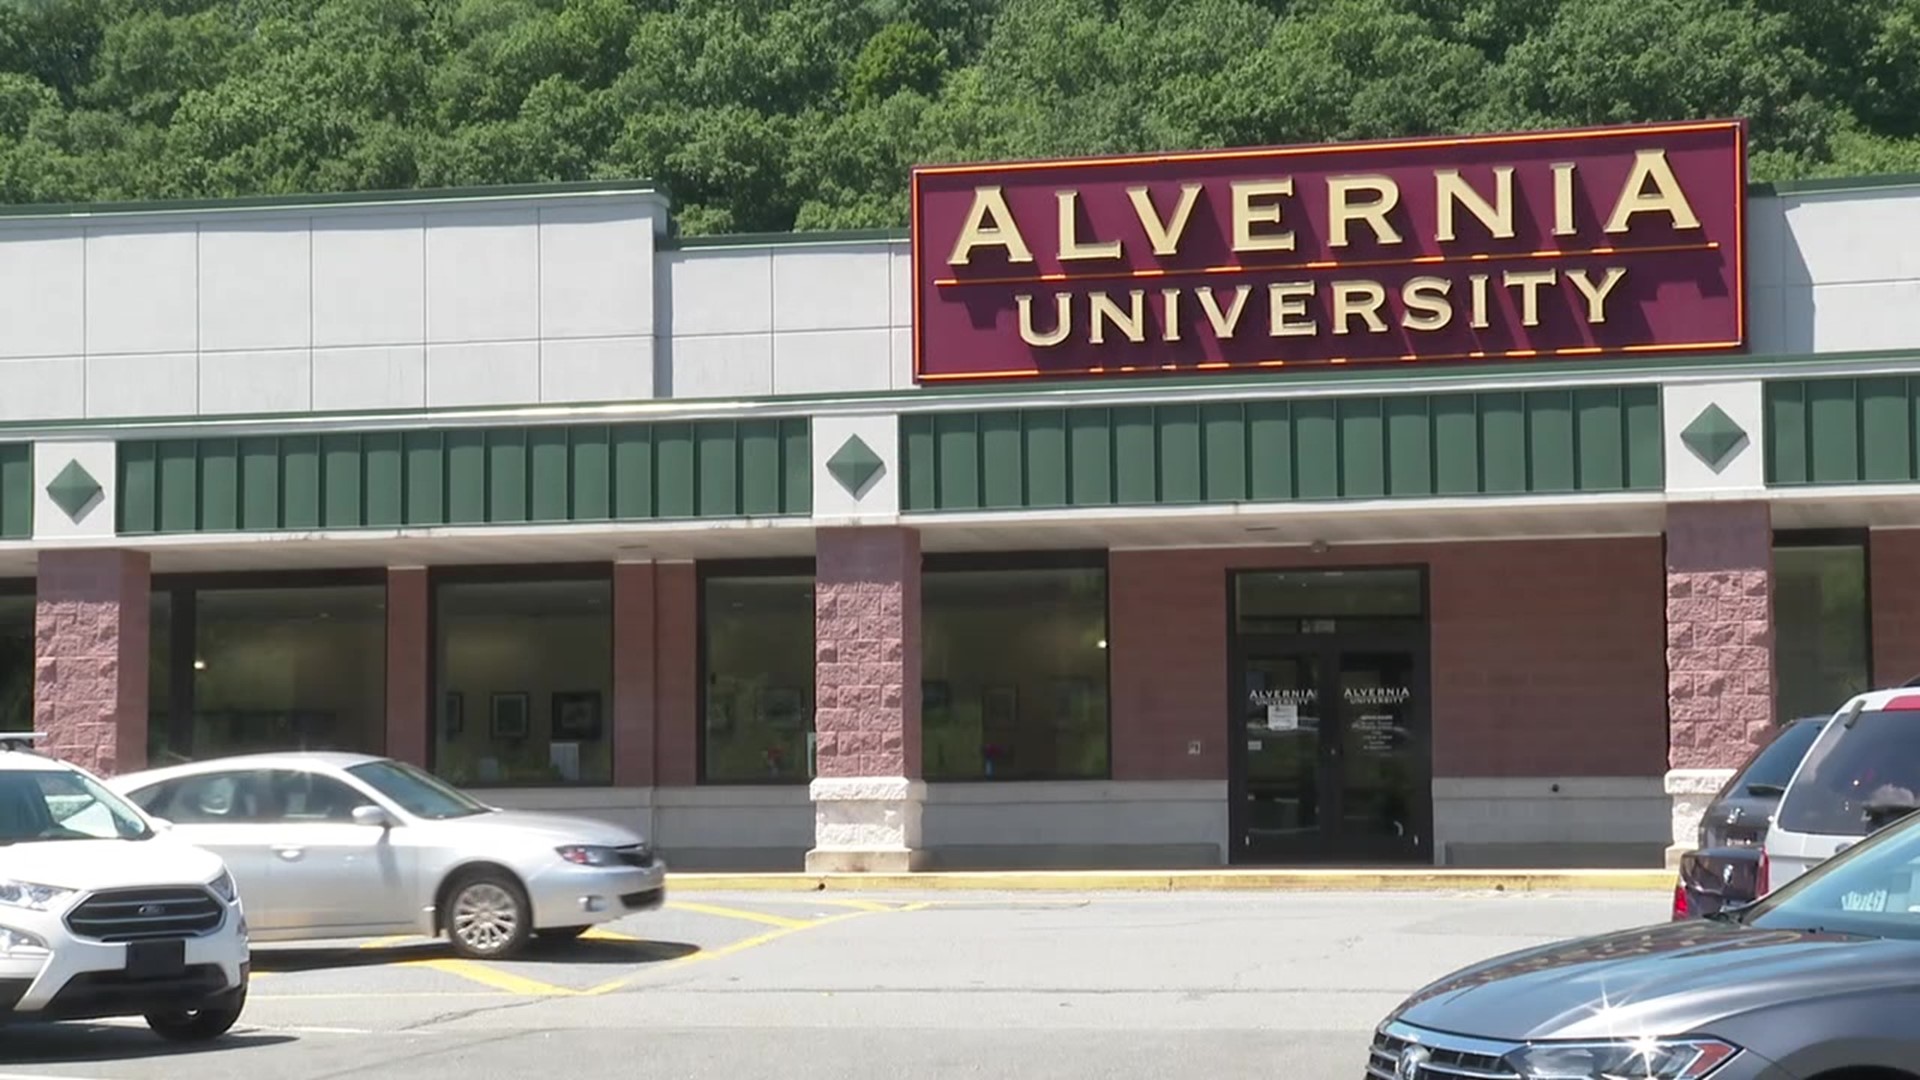 From selling produce to selling opportunity, one long-vacant grocery store building in Schuylkill County will soon be home to a new college campus.